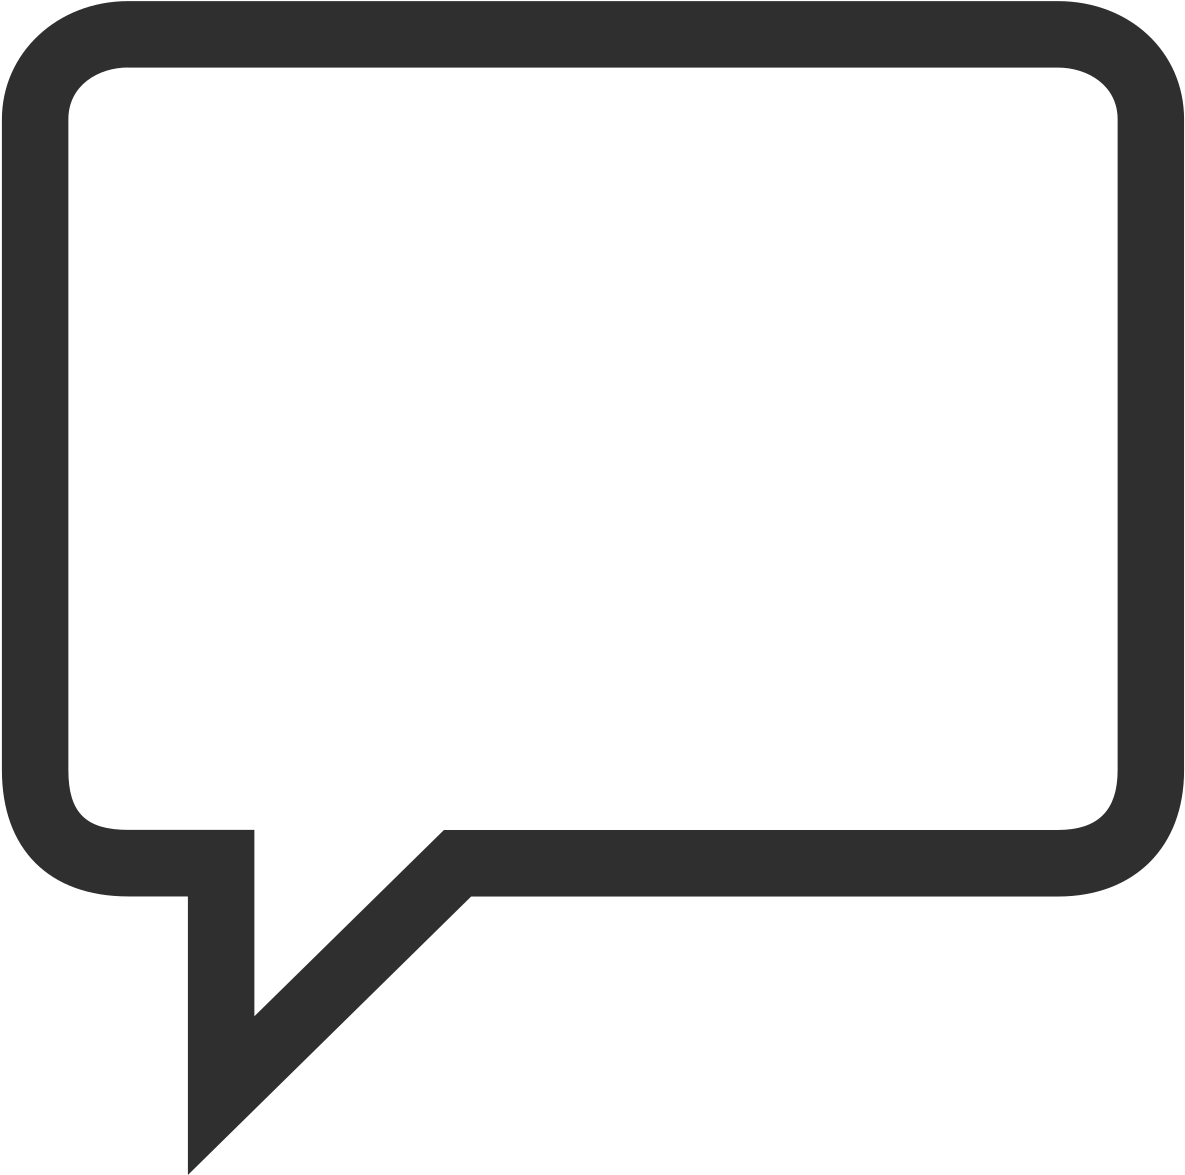 Speech Bubble Clipart Square And Other Clipart Images On Cliparts Pub™